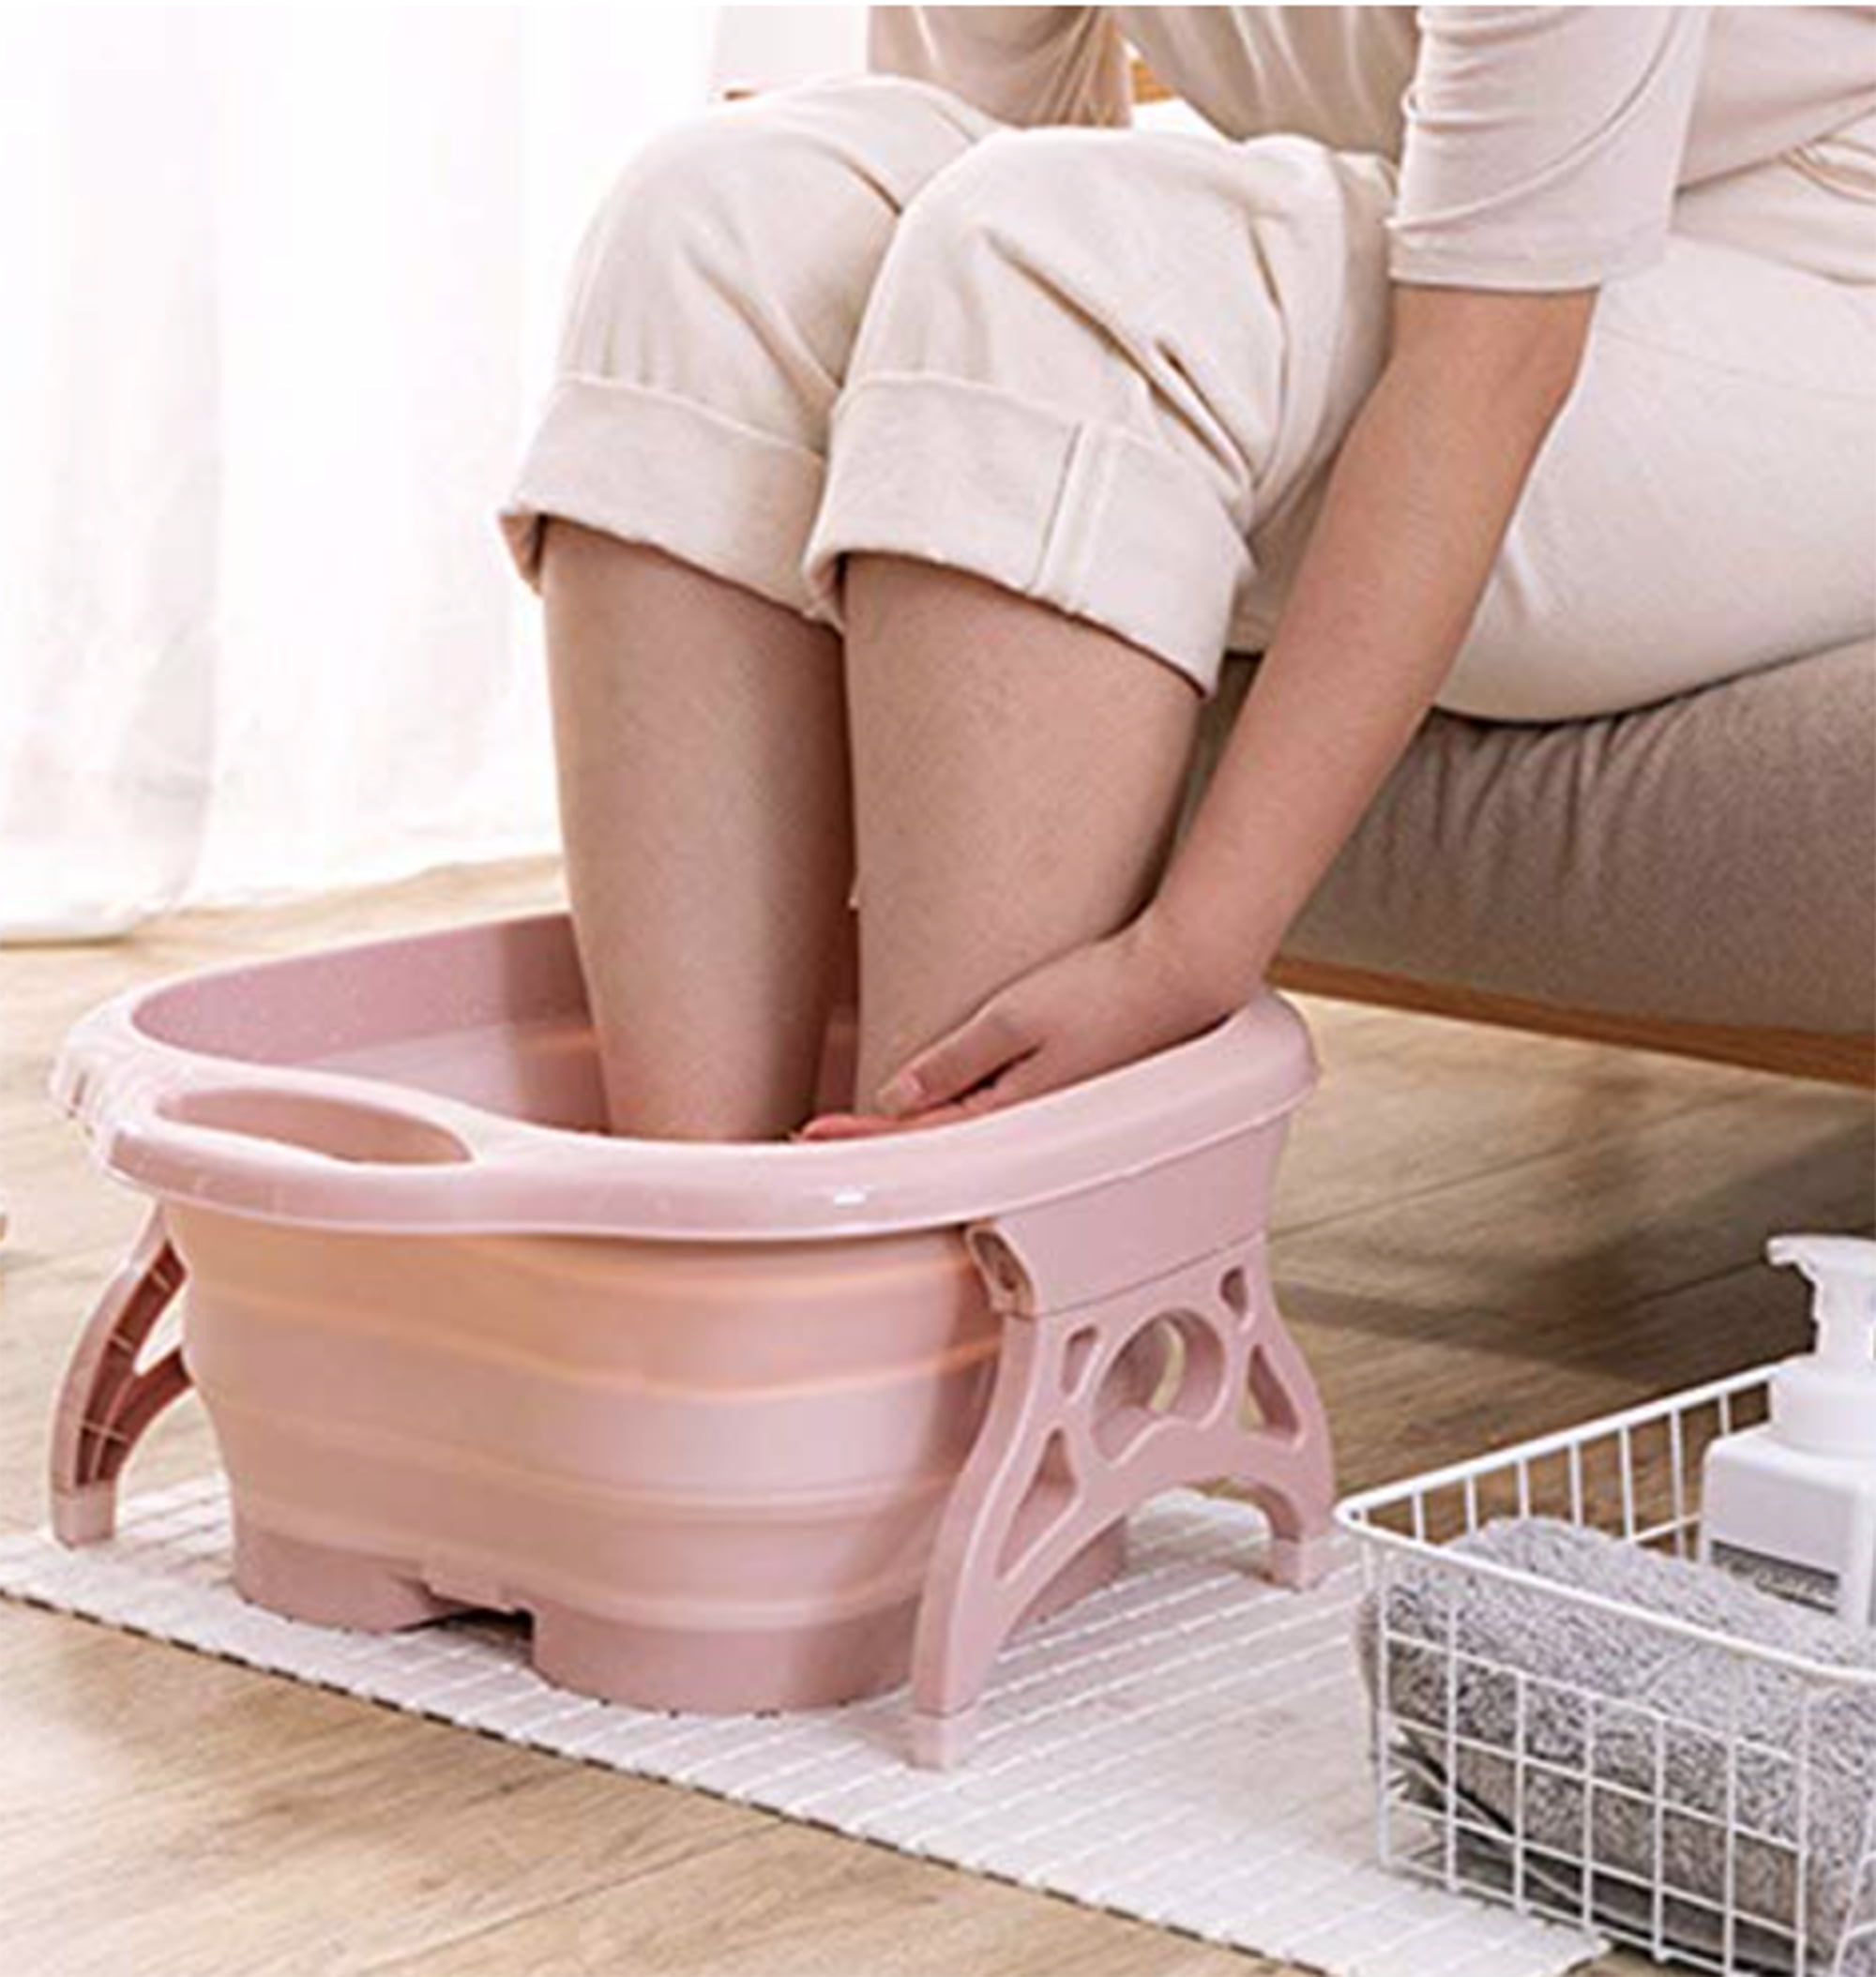 Foot Bath - Collapsible Foot Spa with Foot Massager rollers - Foot Soak